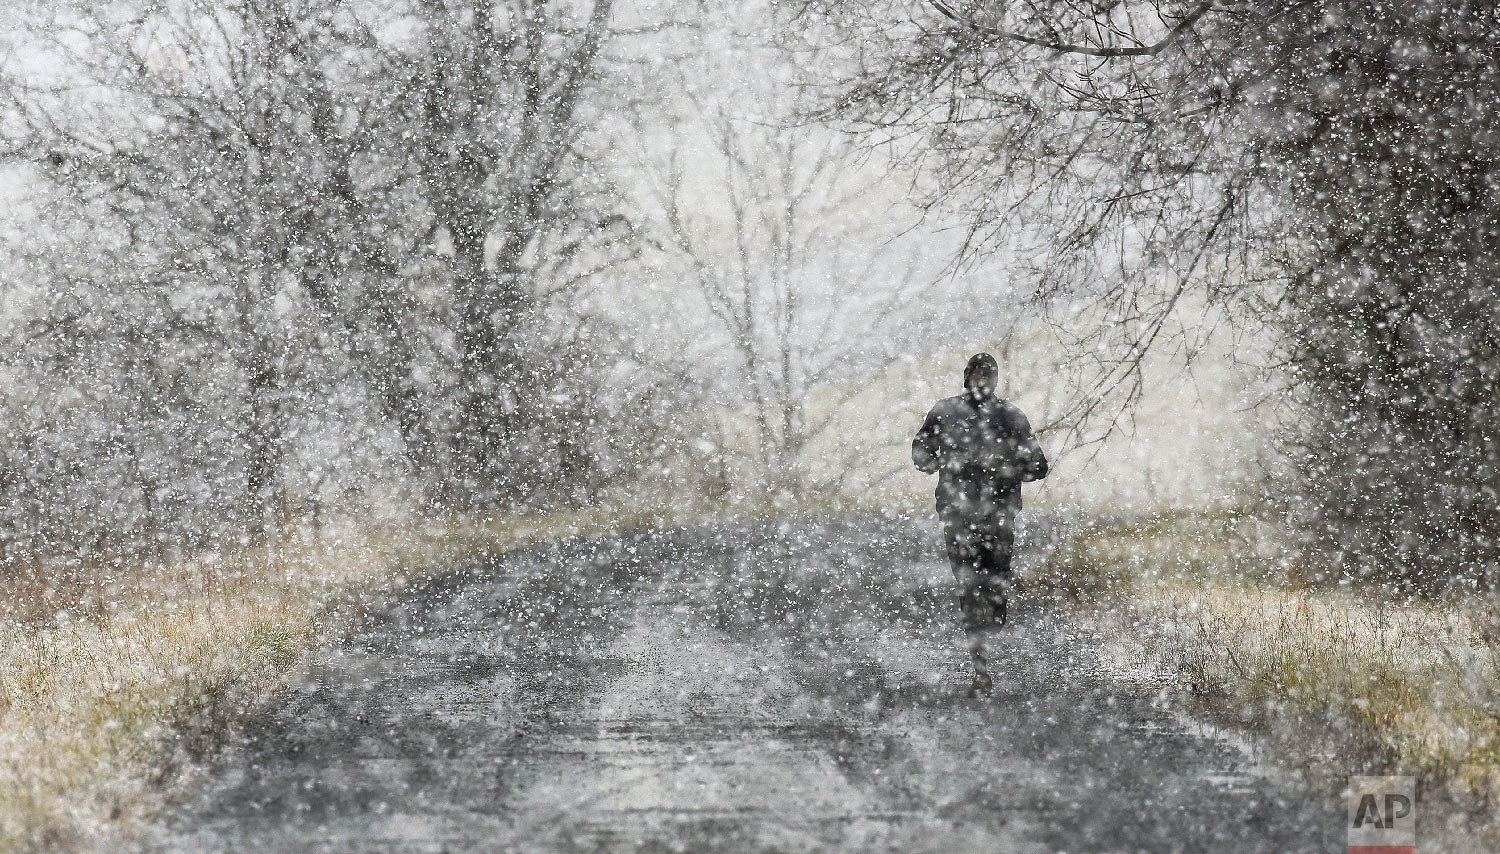  David Cheromei, Emory & Henry (VA) College Head Cross Country/Track & Field Coach, goes for a run on Itta Bena Road in Emory, Va. during a heavy snow fall Tuesday, Jan. 29, 2019. (Andre Teague/Bristol Herald Courier via AP) 